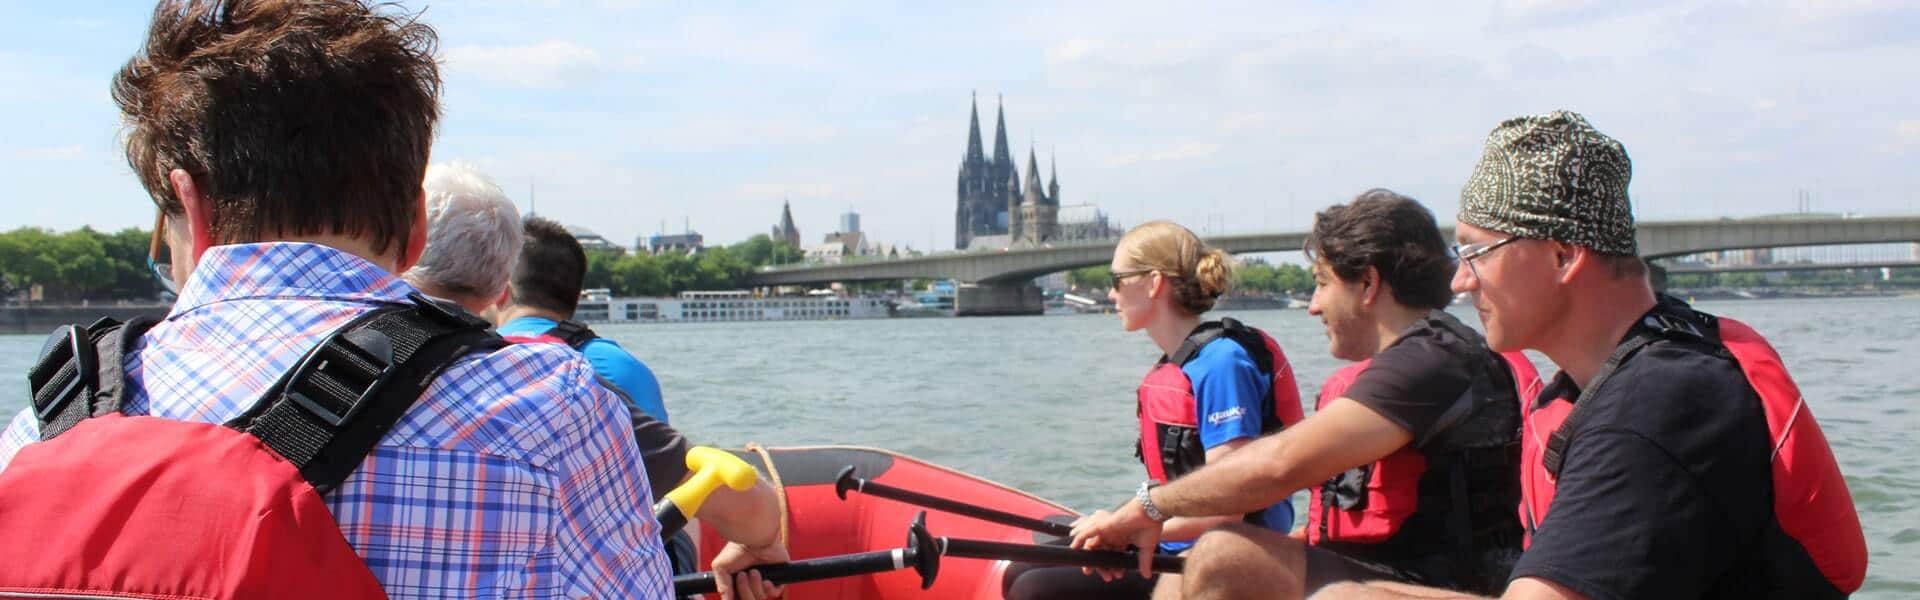 Rafting team event near Cologne